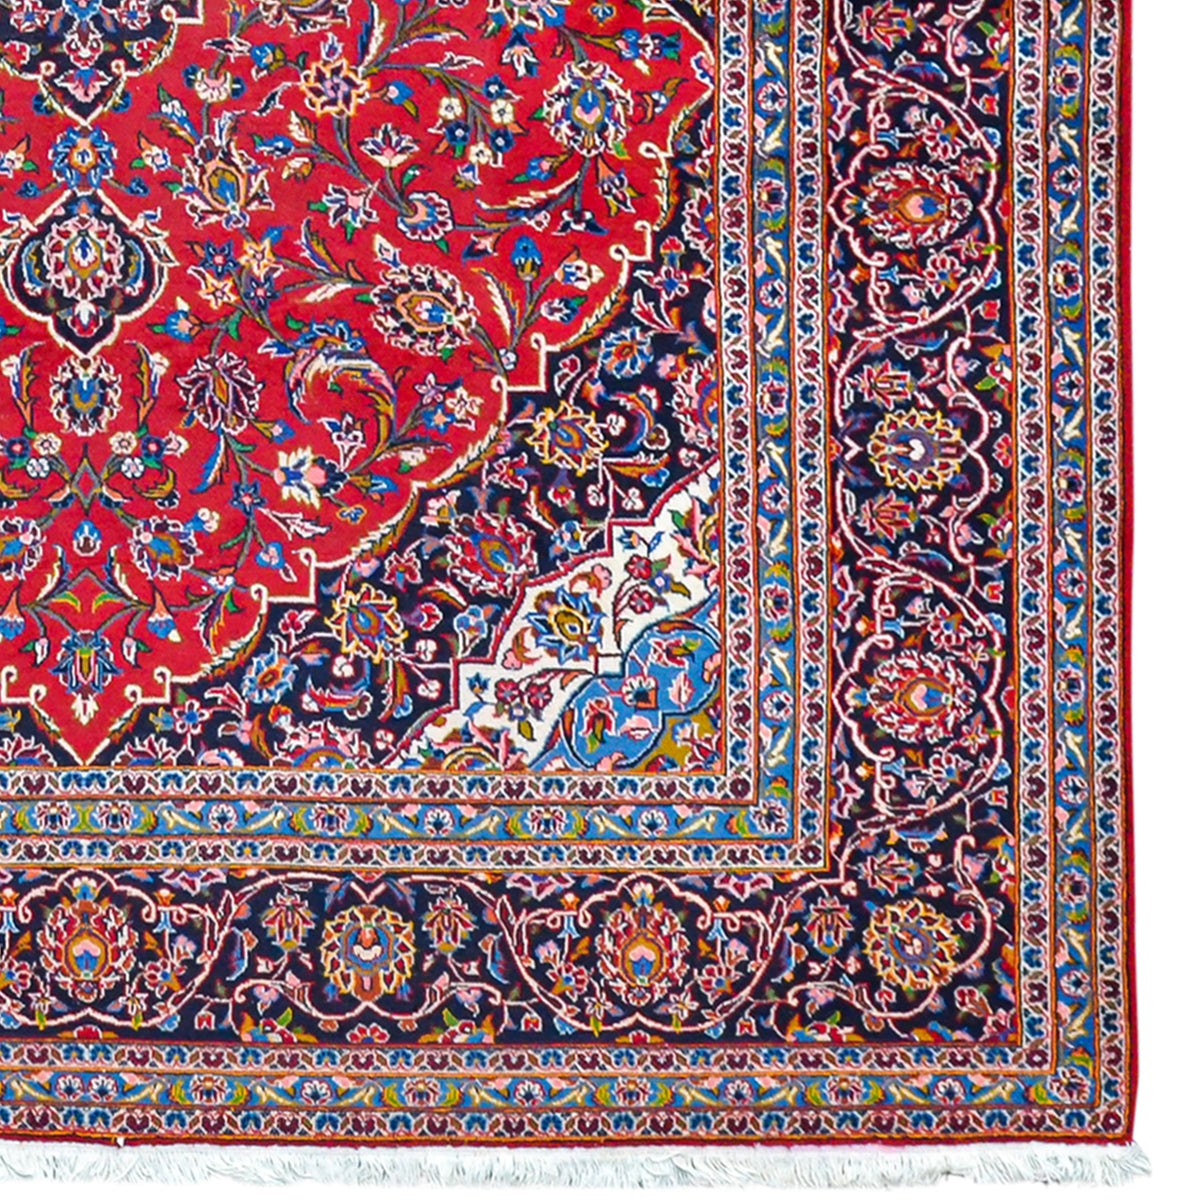 Fine Hand-knotted Wool Kashan Extra Large Persian Rug 300cm x 420cm